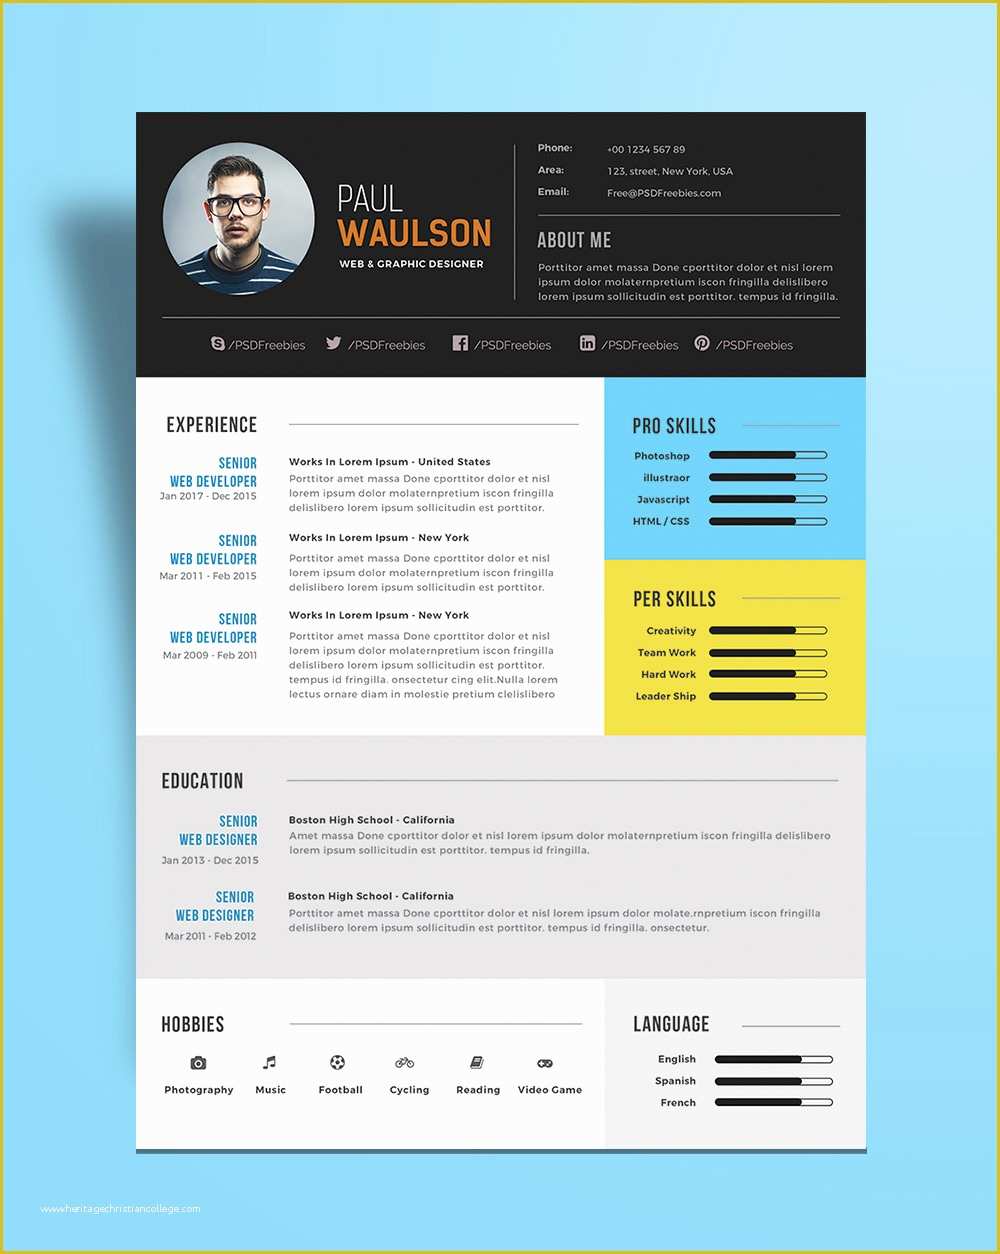 Free Modern Resume Template 2017 Of Free Modern Resume Template for Web Graphic Designer Psd